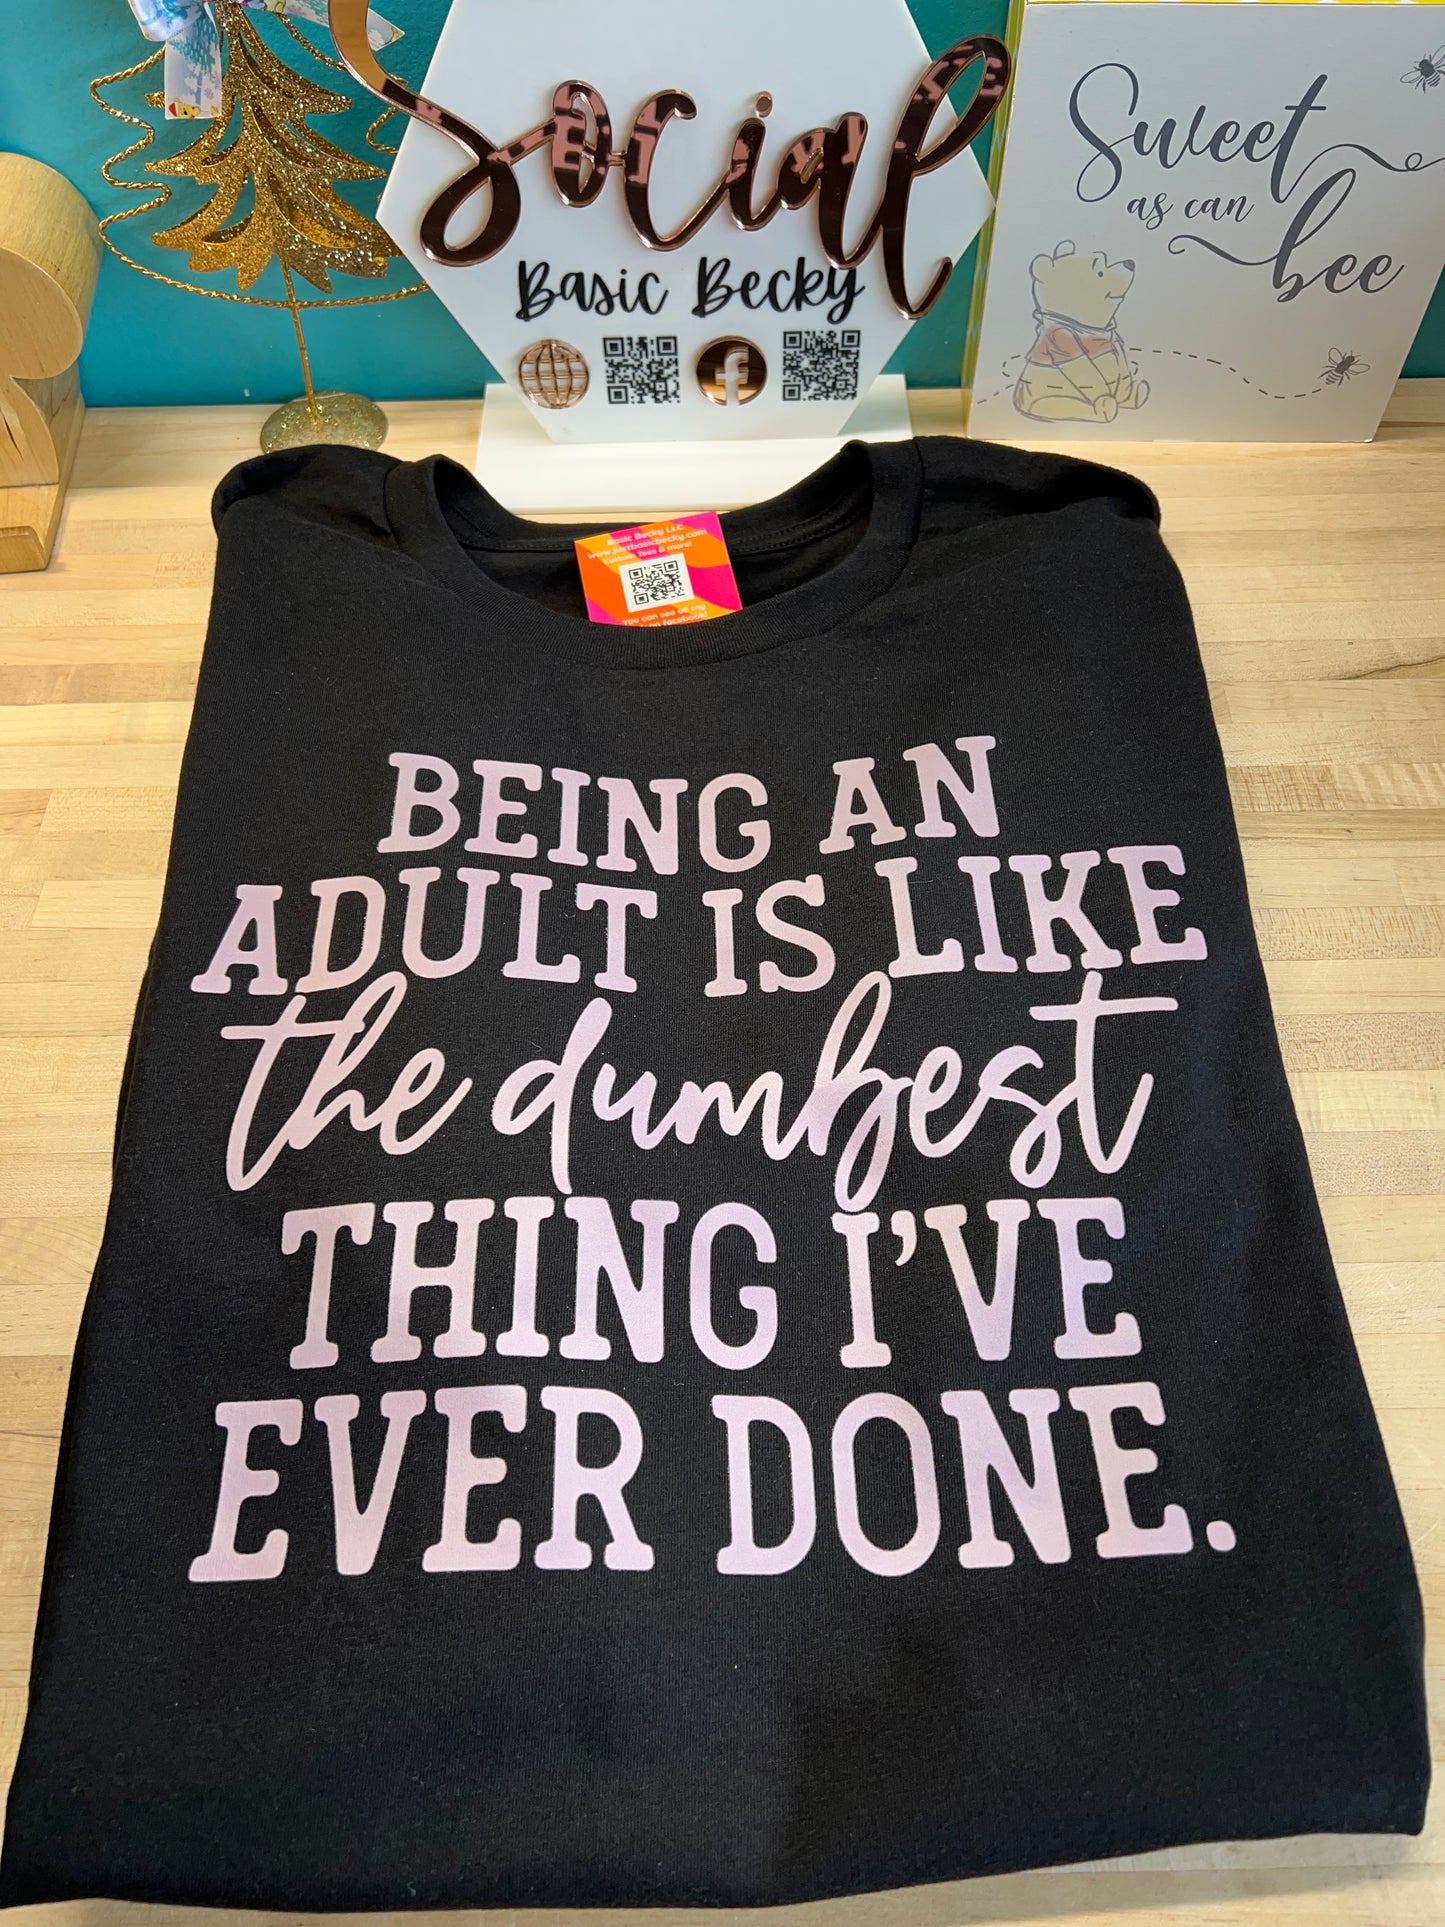 BEING AN ADULT IS LIKE THE DUMBEST THING I'VE EVER DONE.